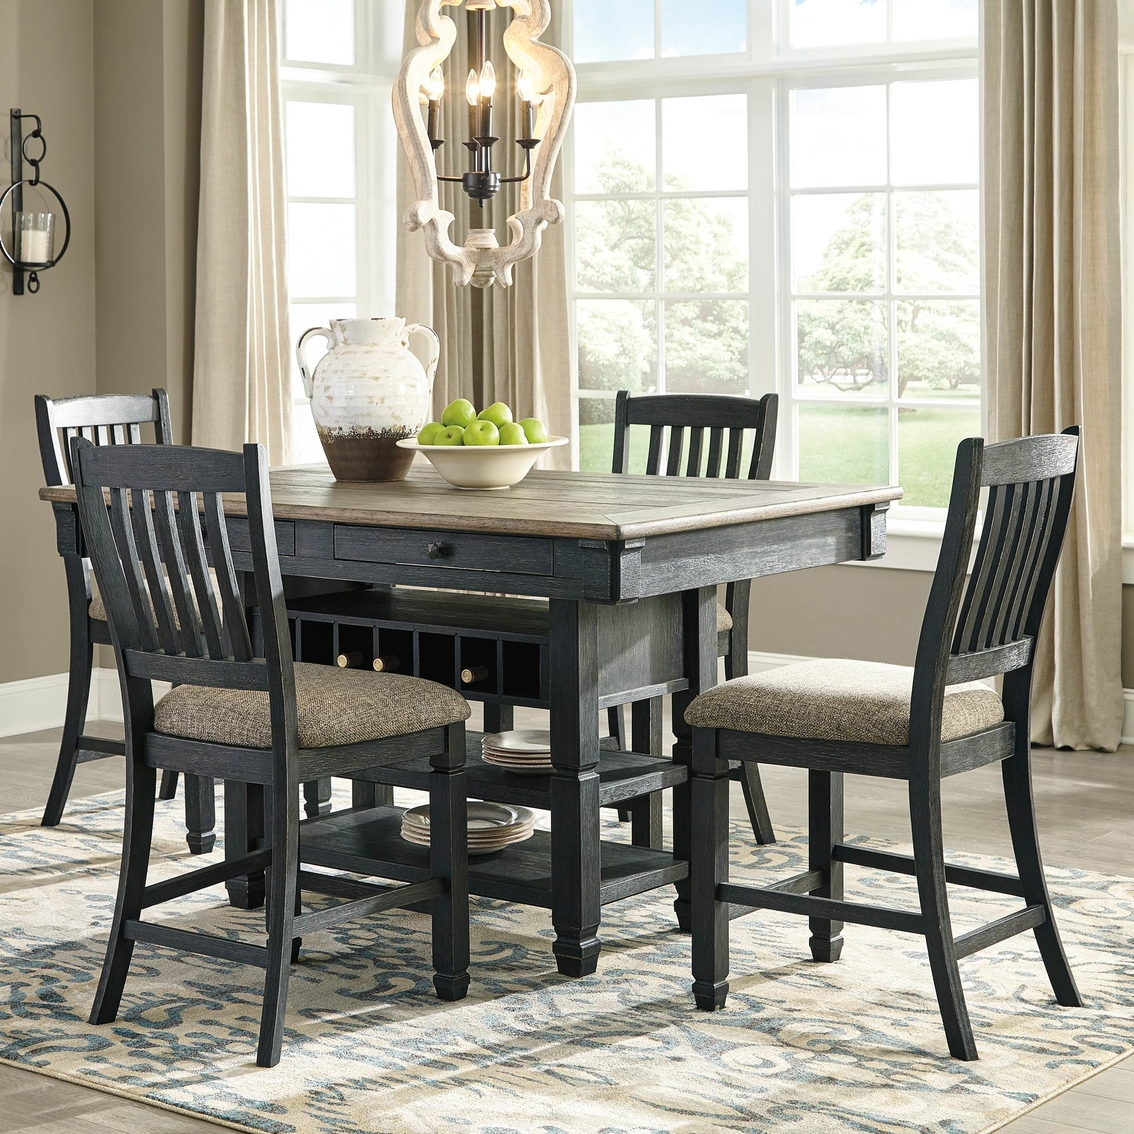 Signature Design by Ashley Tyler Creek Rectangular Dining Room Counter Height Table - Image 2 of 3